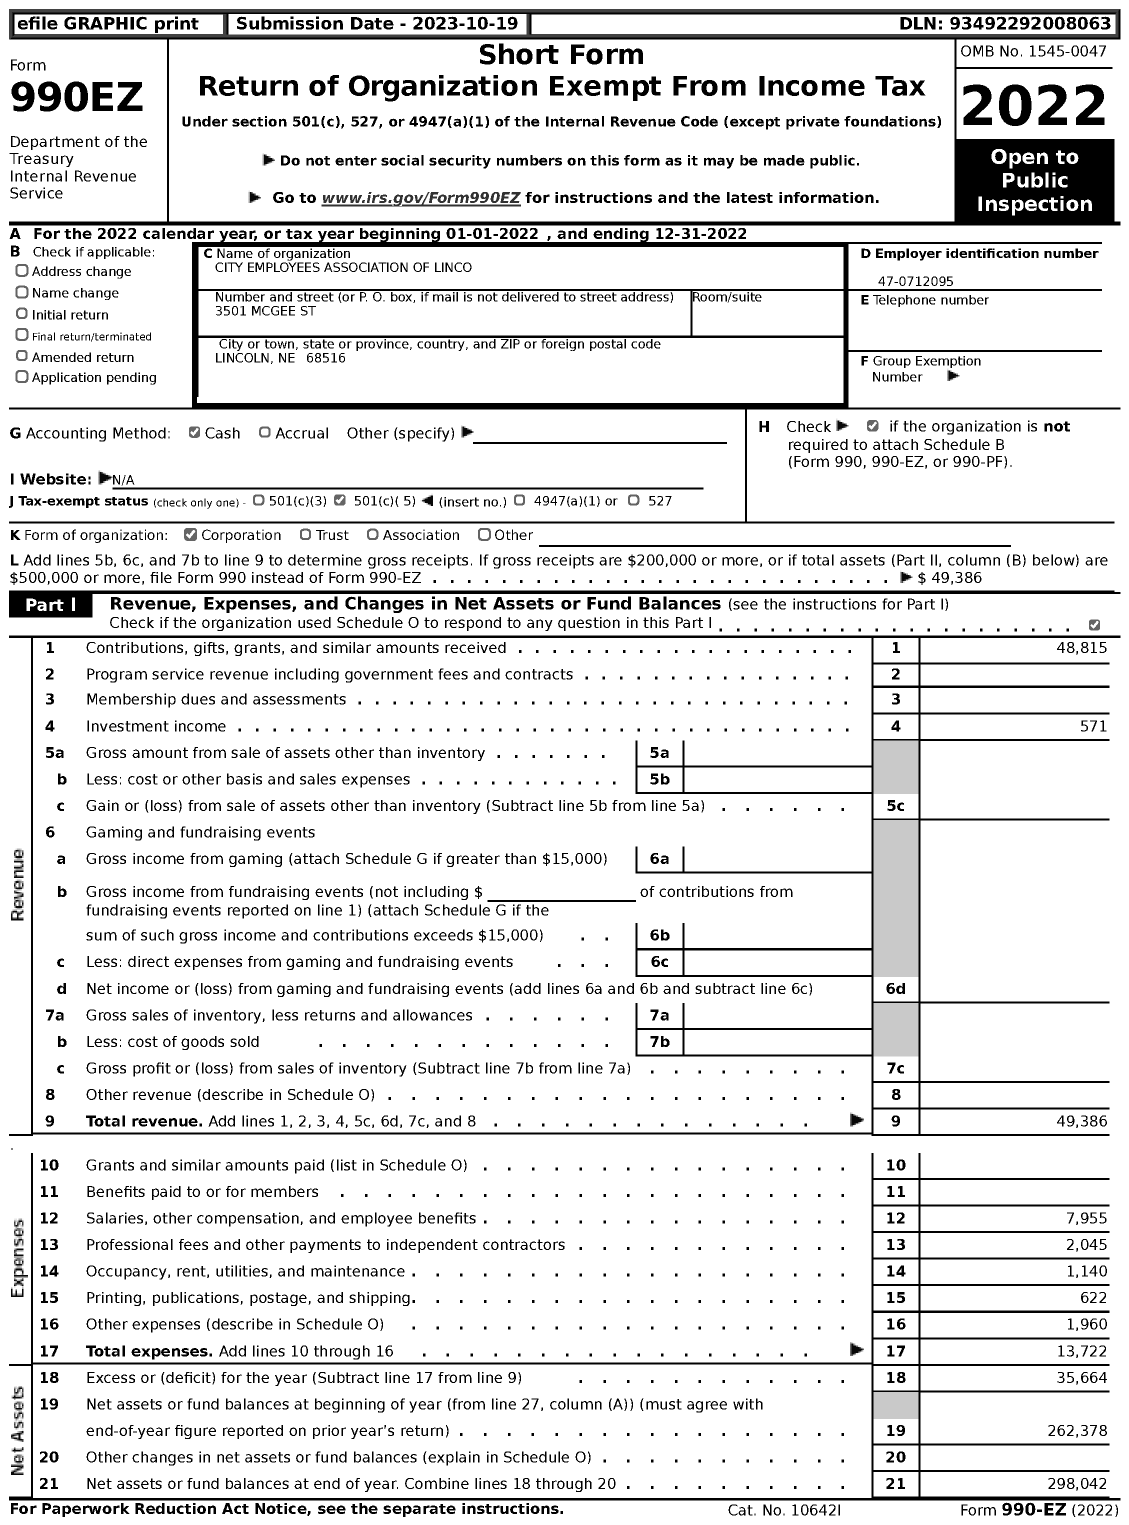 Image of first page of 2022 Form 990EZ for City Employees Association of Linco